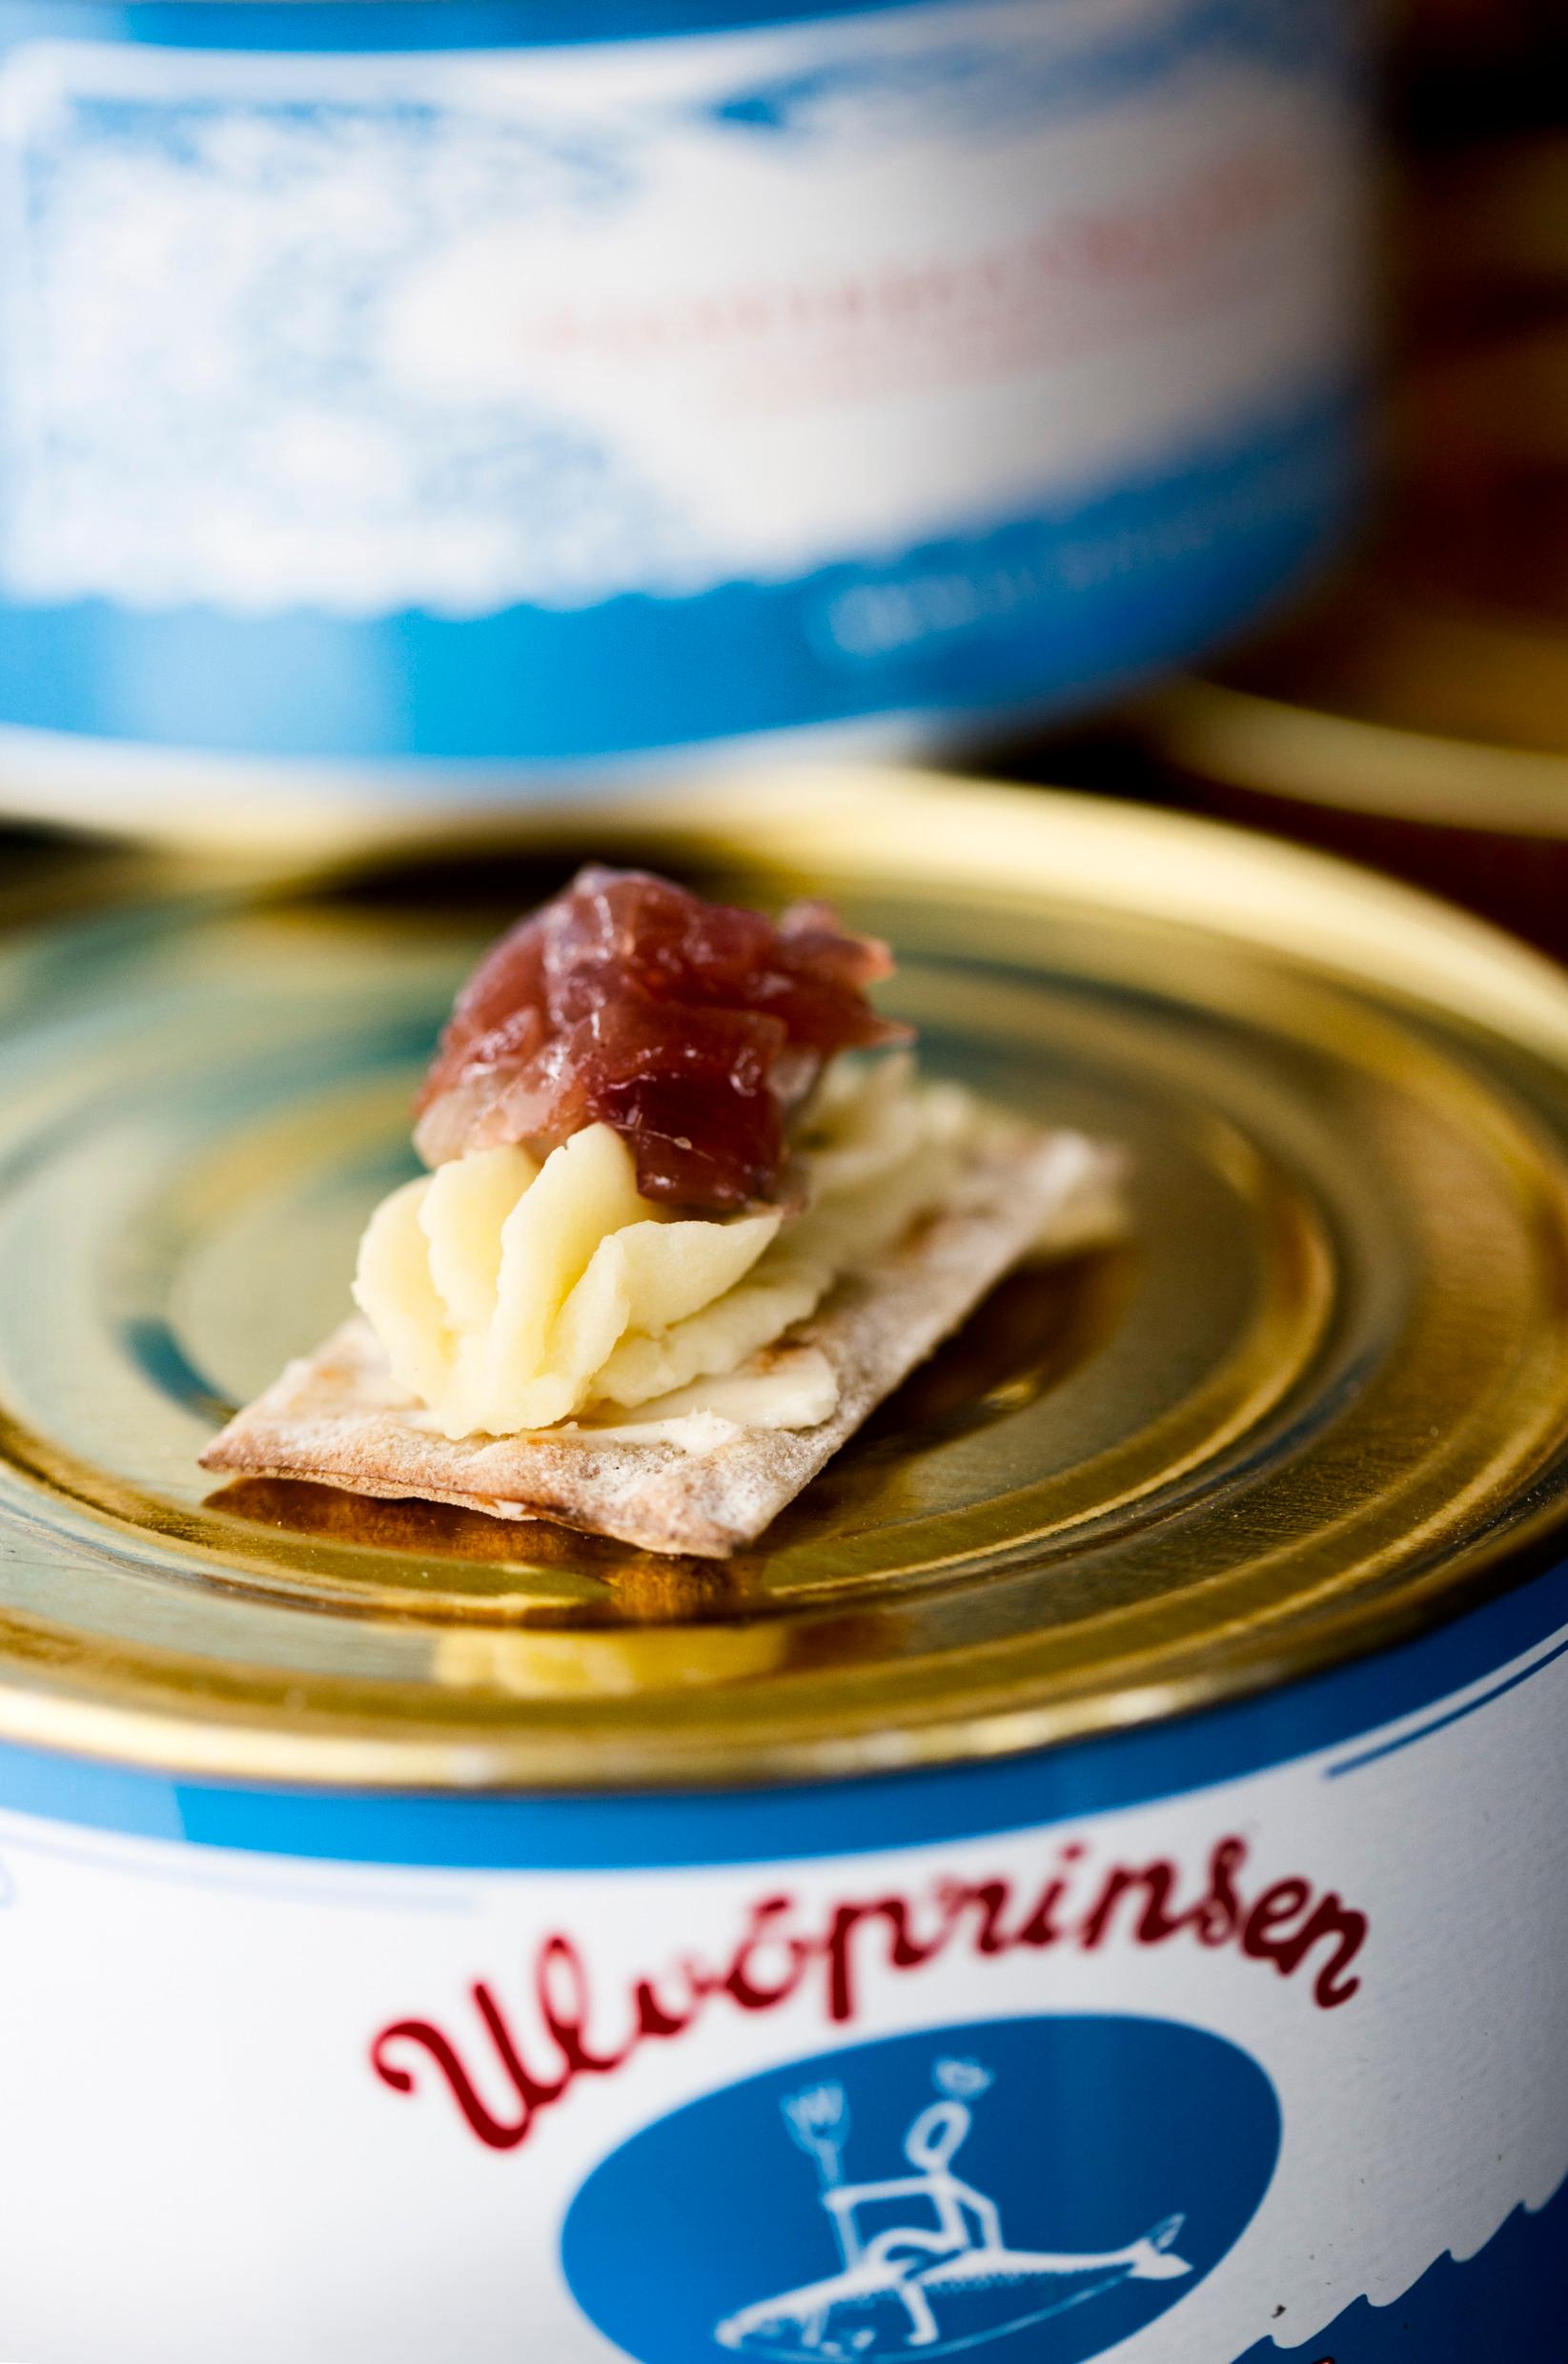 Tins of fermented herring. A tiny crispbread lies on top with some mashed potato and herring on.